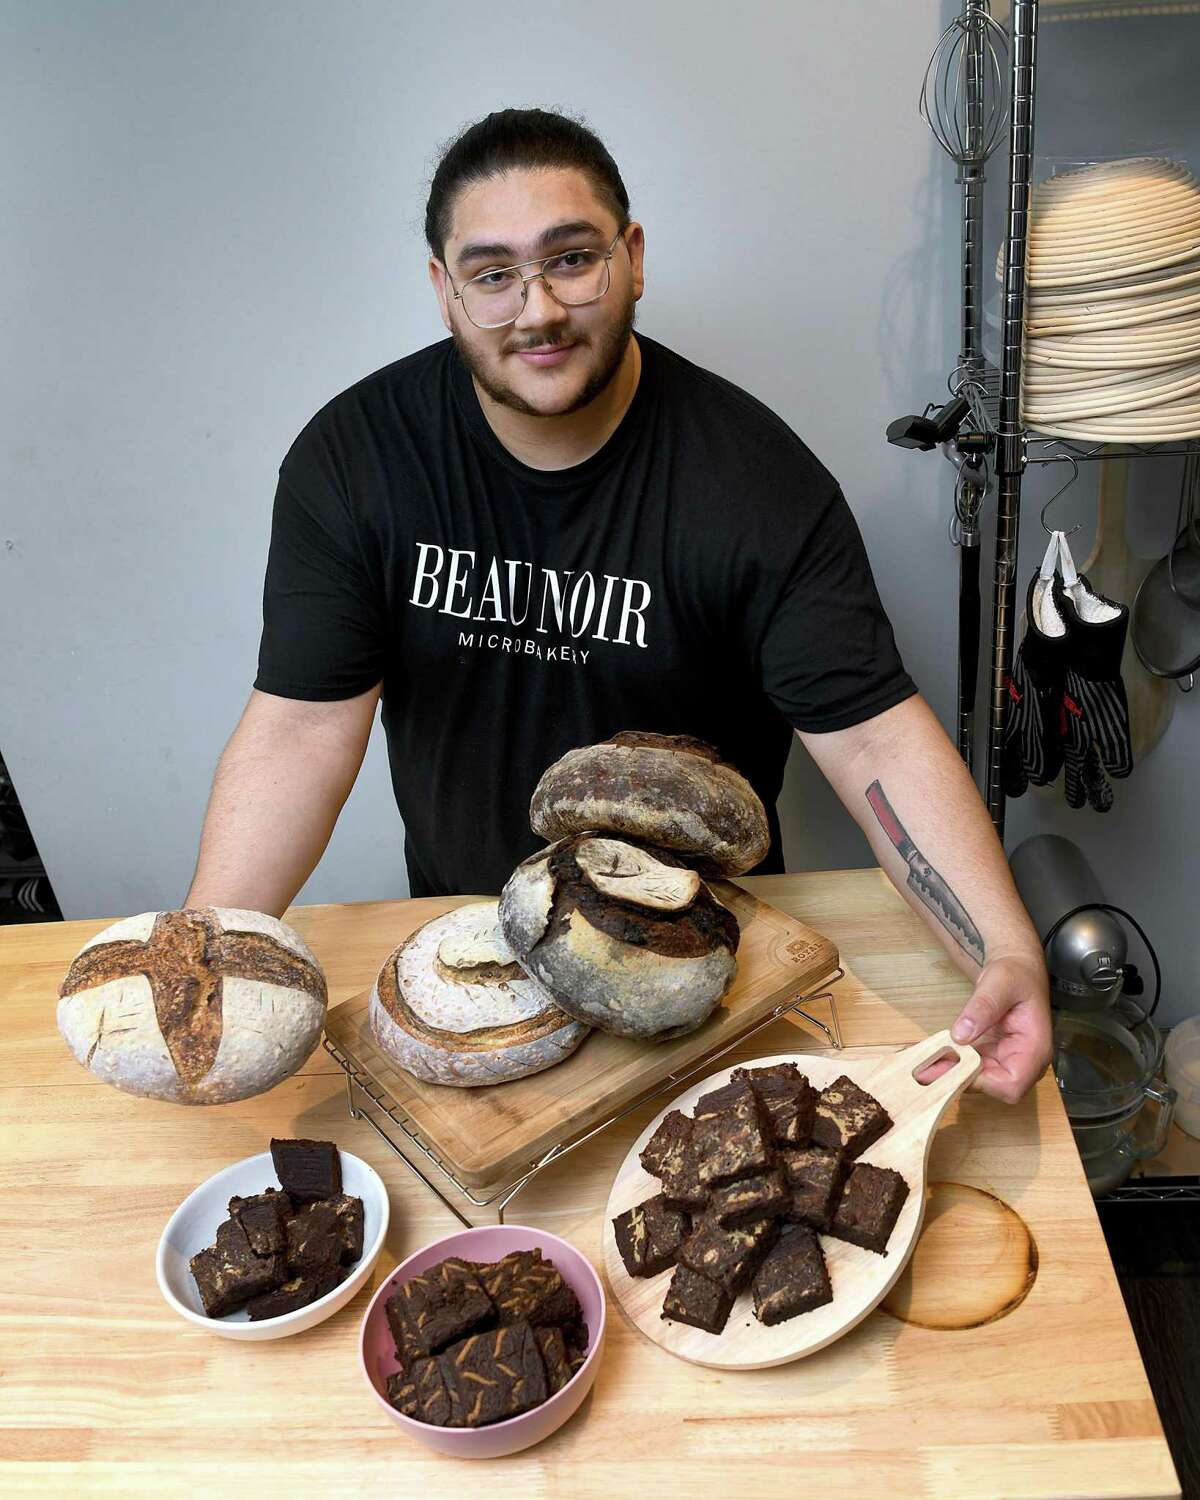 Bethel resident, Eric Chicas, 28, launches an at-home micro-bakery specializing in sourdough goods. The name of the business is Beau Noir Microbakery. Photo taken Friday, May 13, 2022